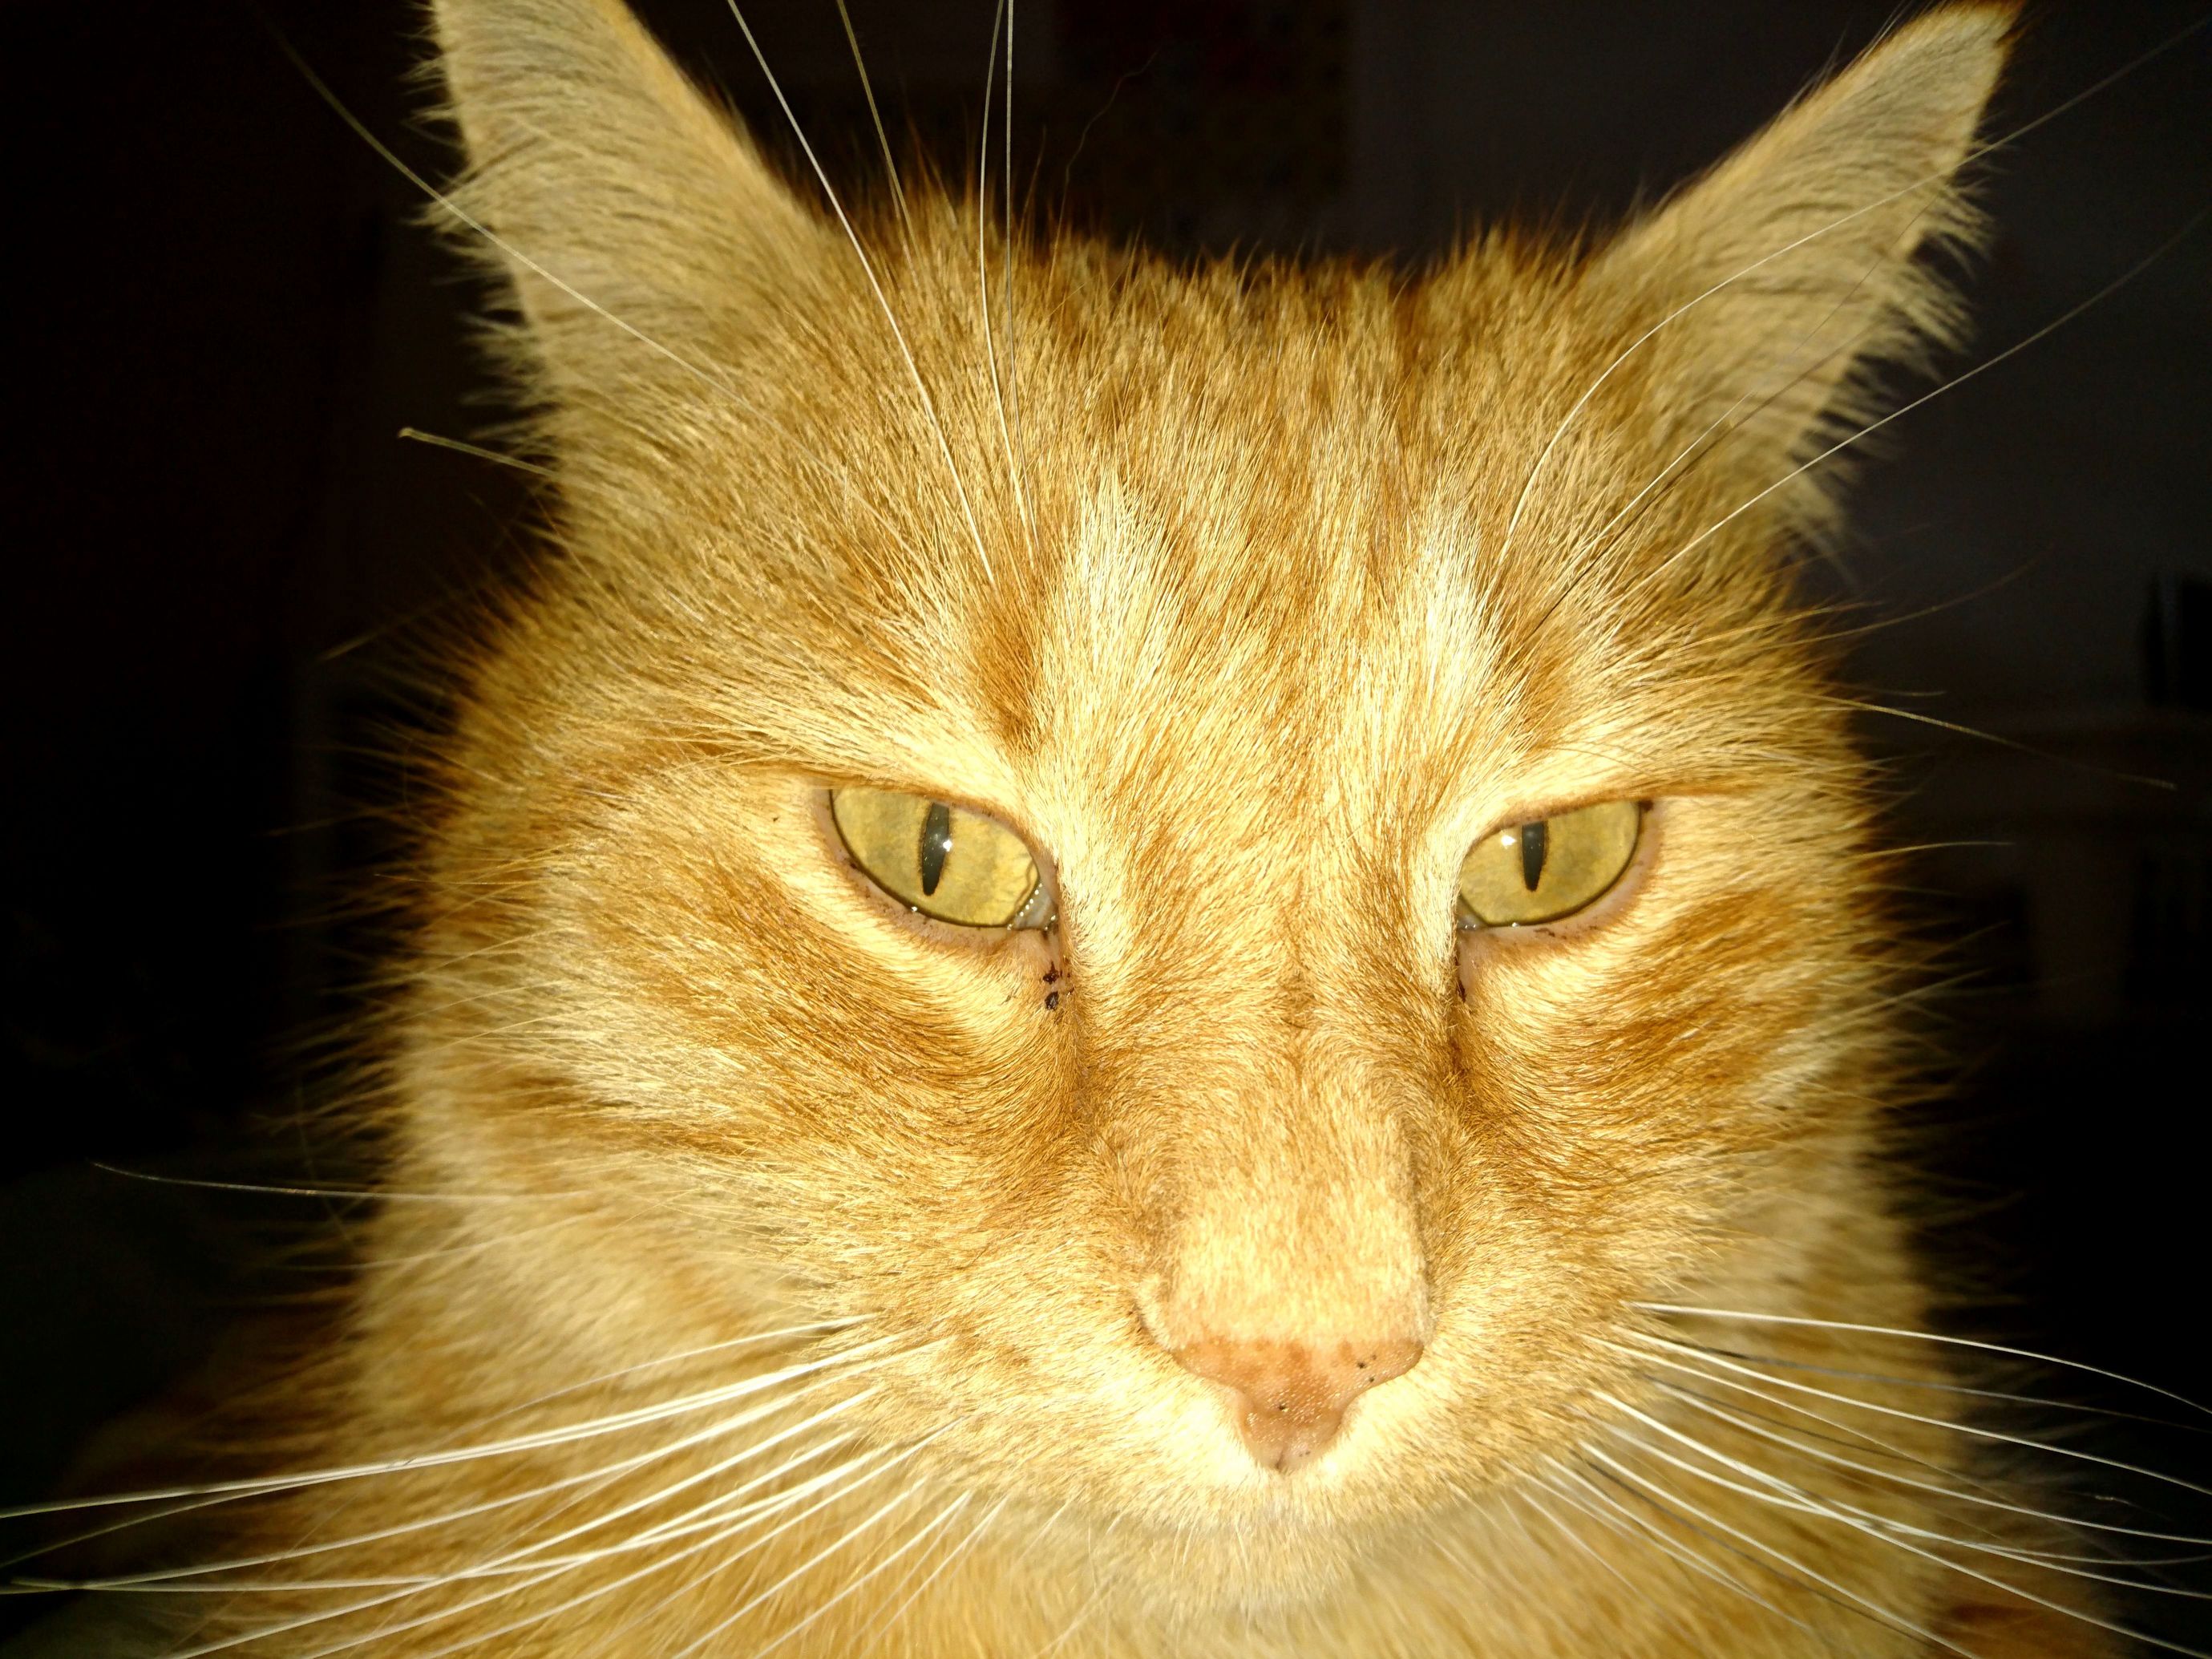 Just got a new camera with an awesome phone. heres a super-hd picture of my cats face